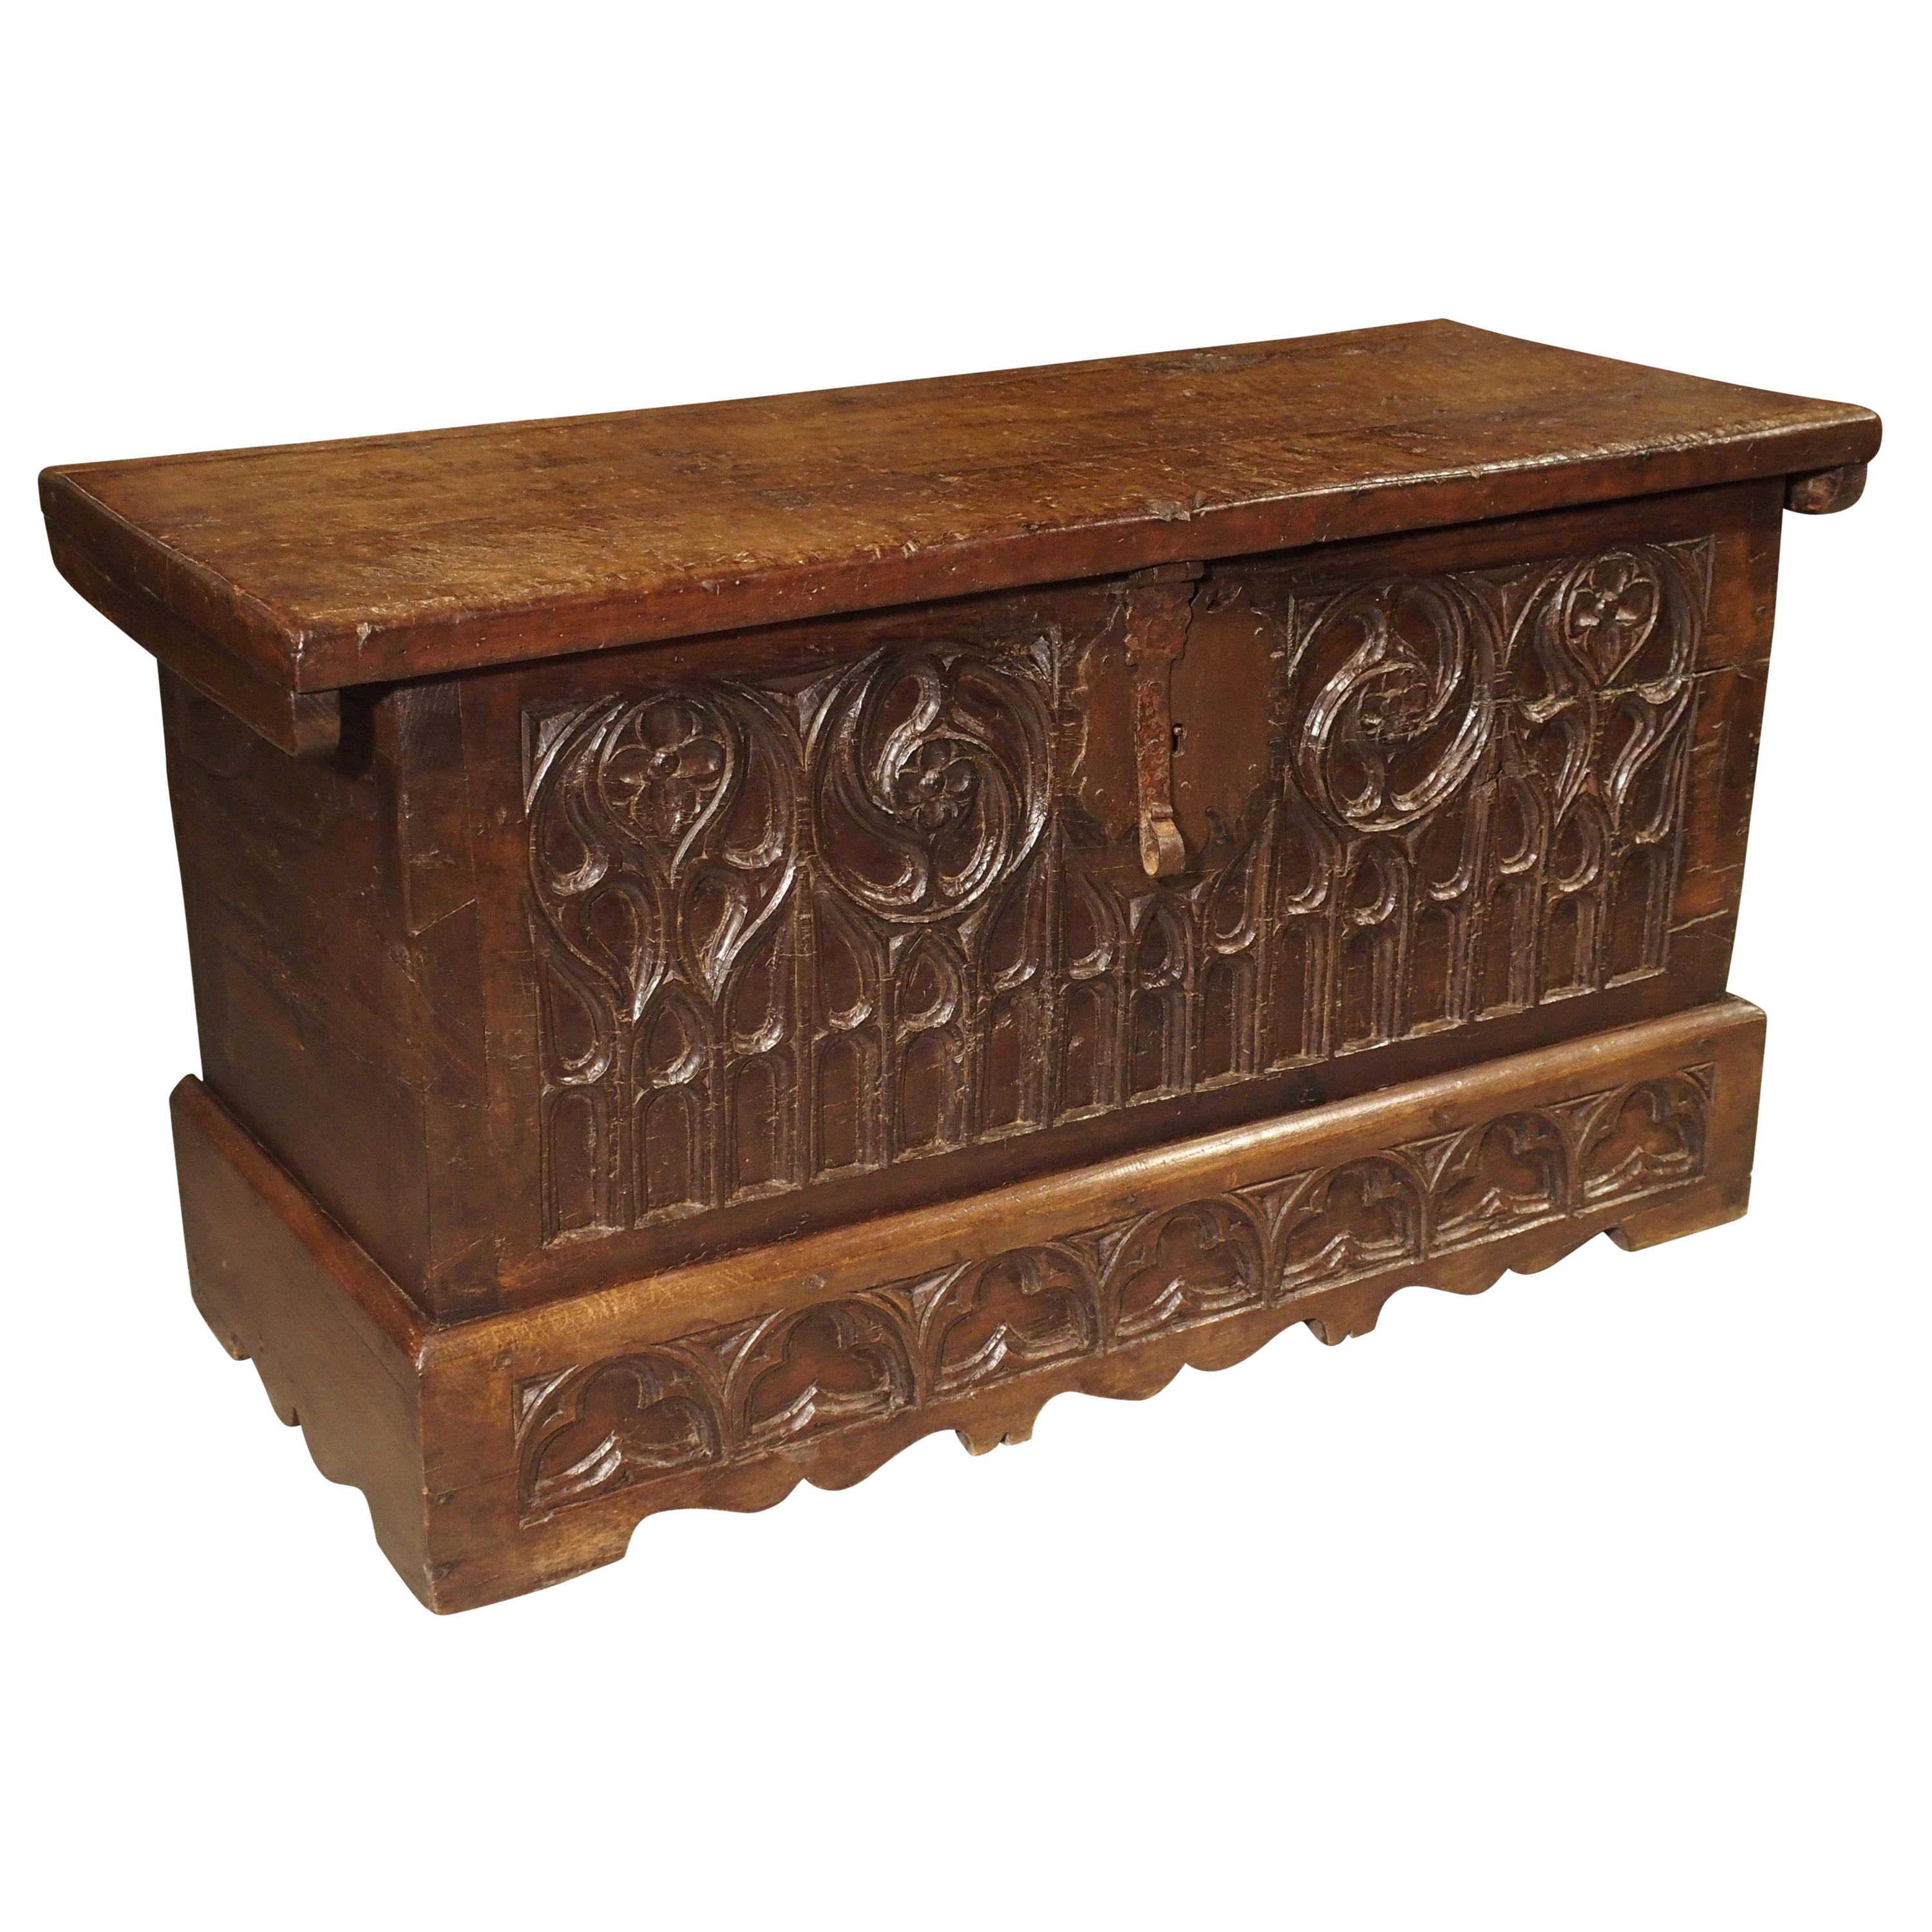 Small 17th Century French Gothic Trunk in Carved Oak